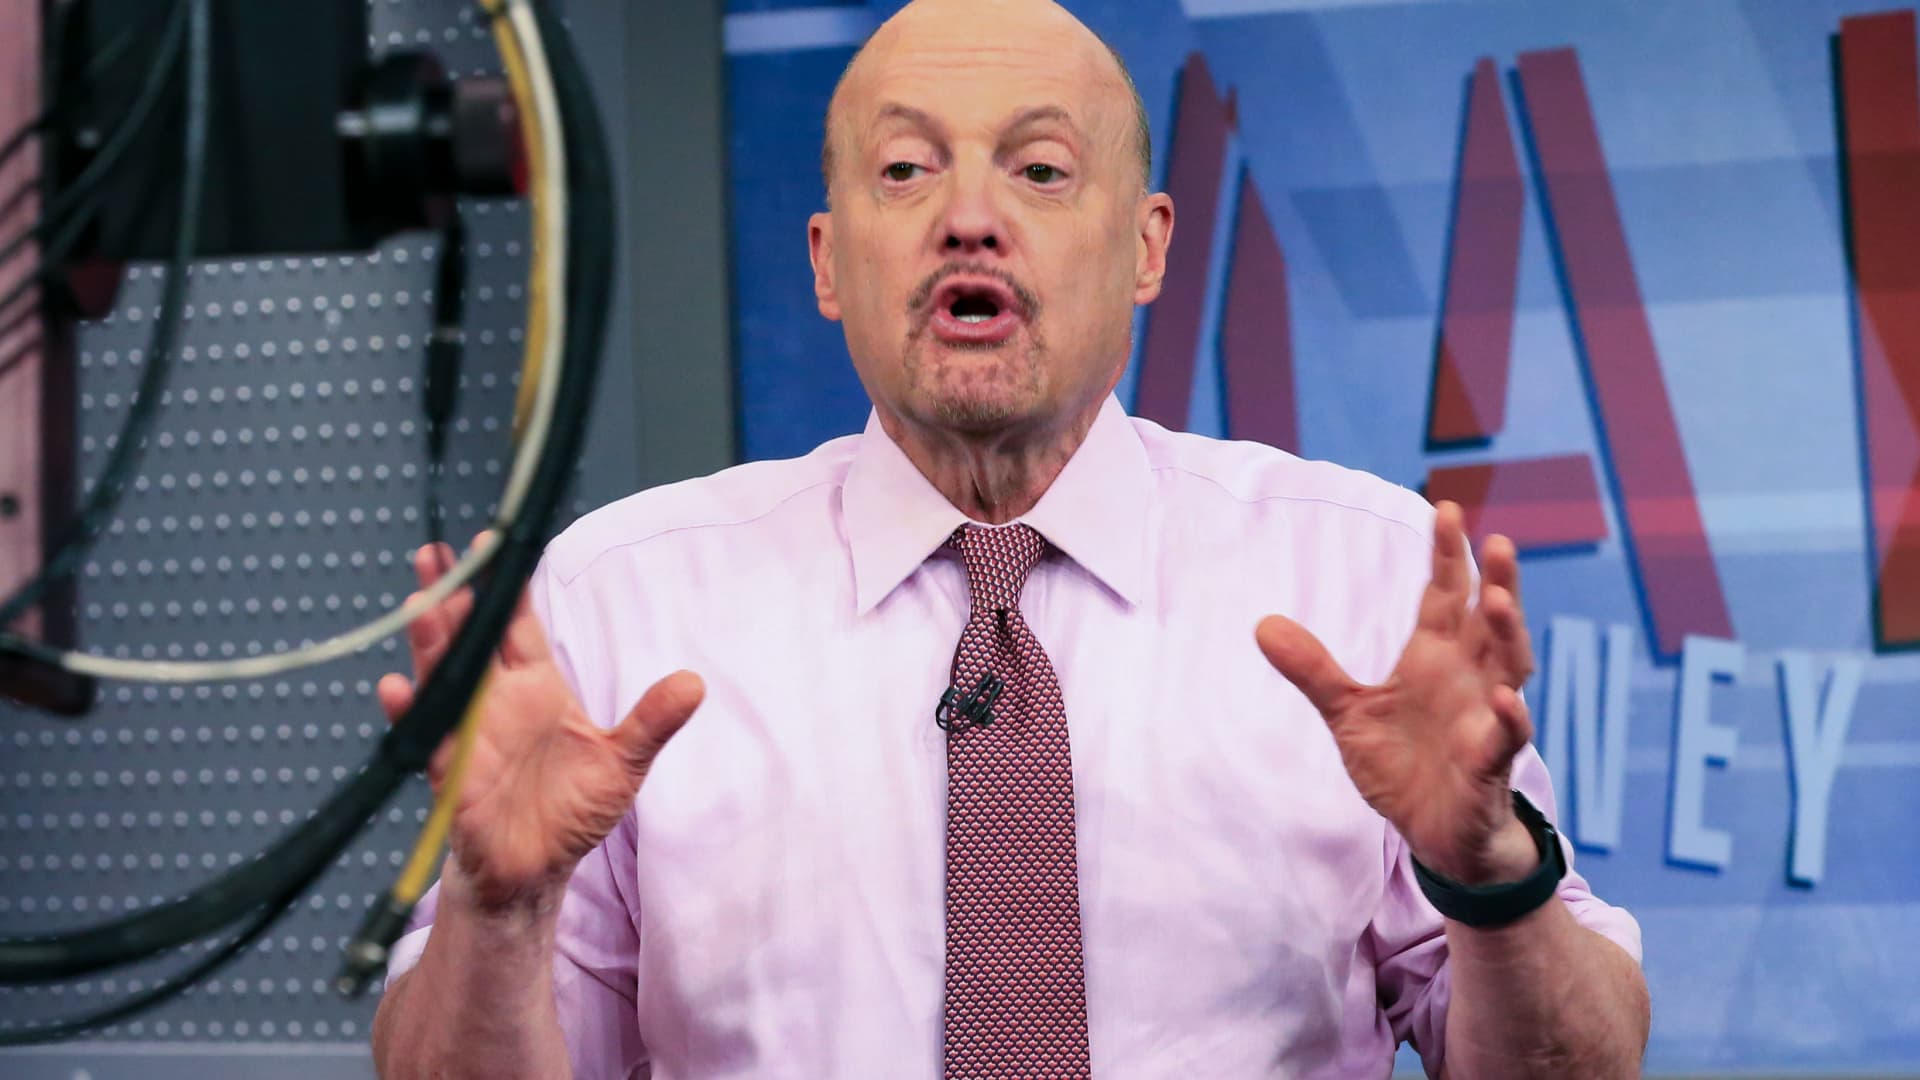 Charts suggest the U.S. dollar could be peaking, Jim Cramer says